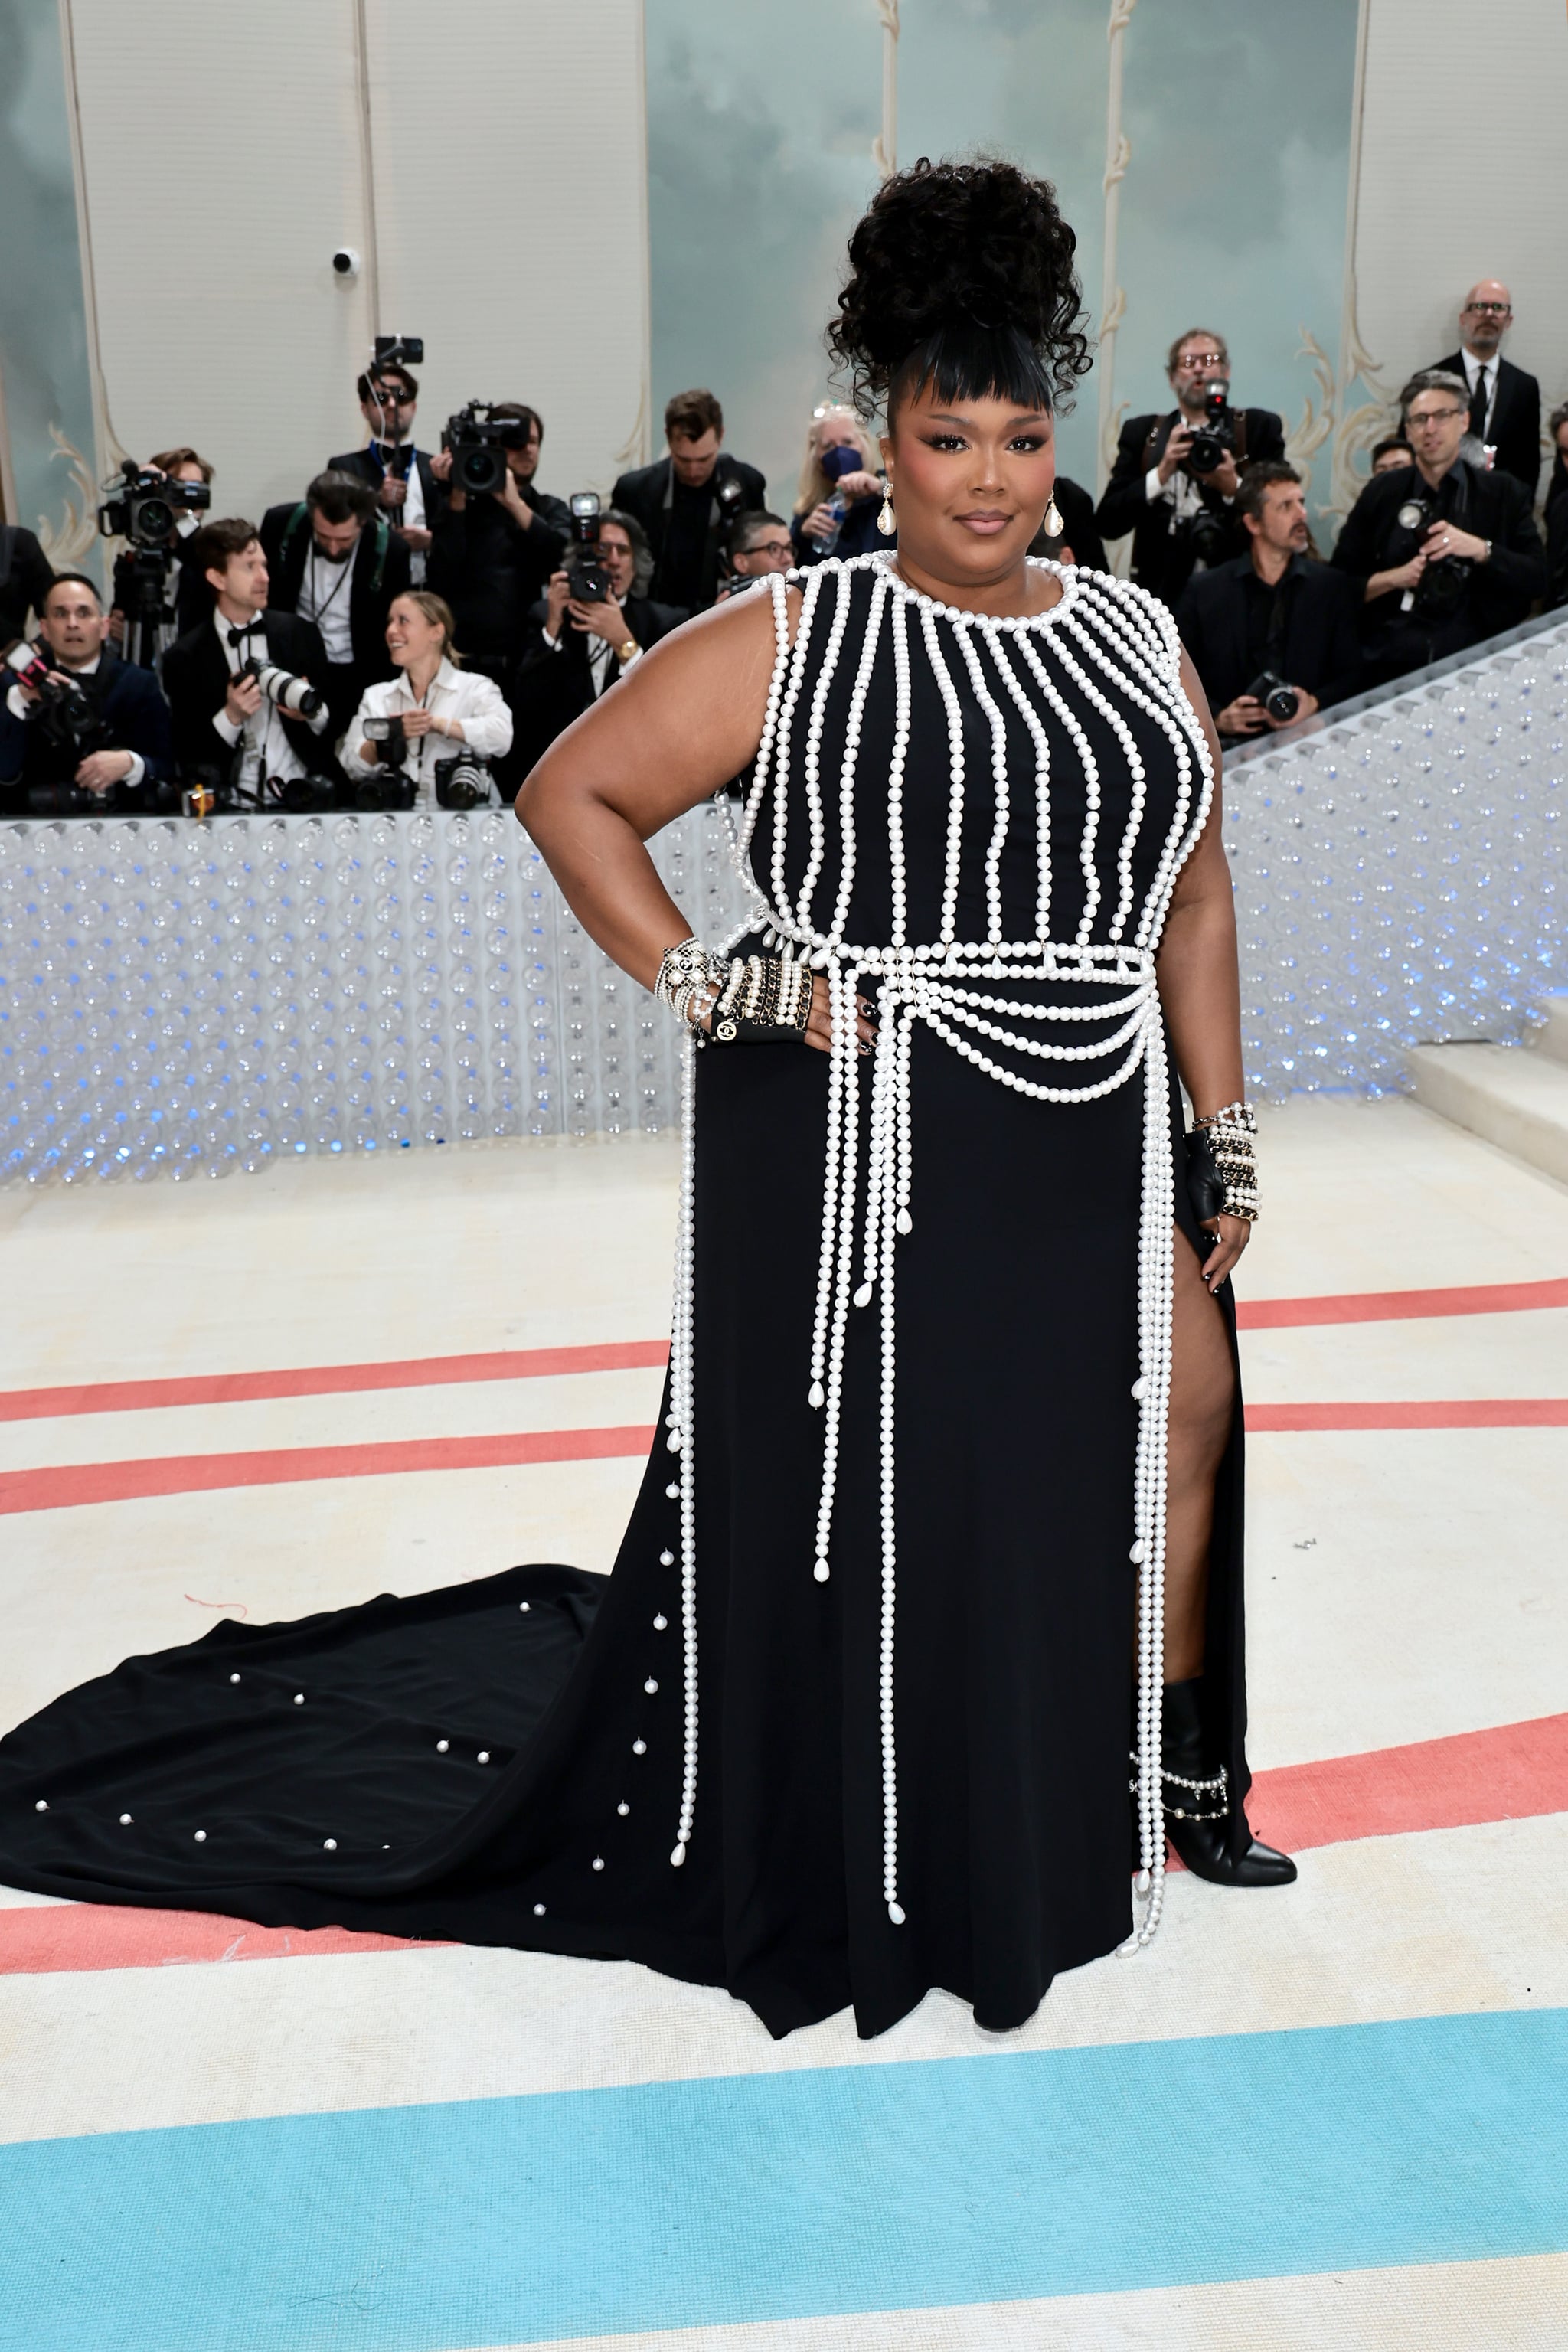 Lizzo attends the 2023 Met Gala with micro bangs.